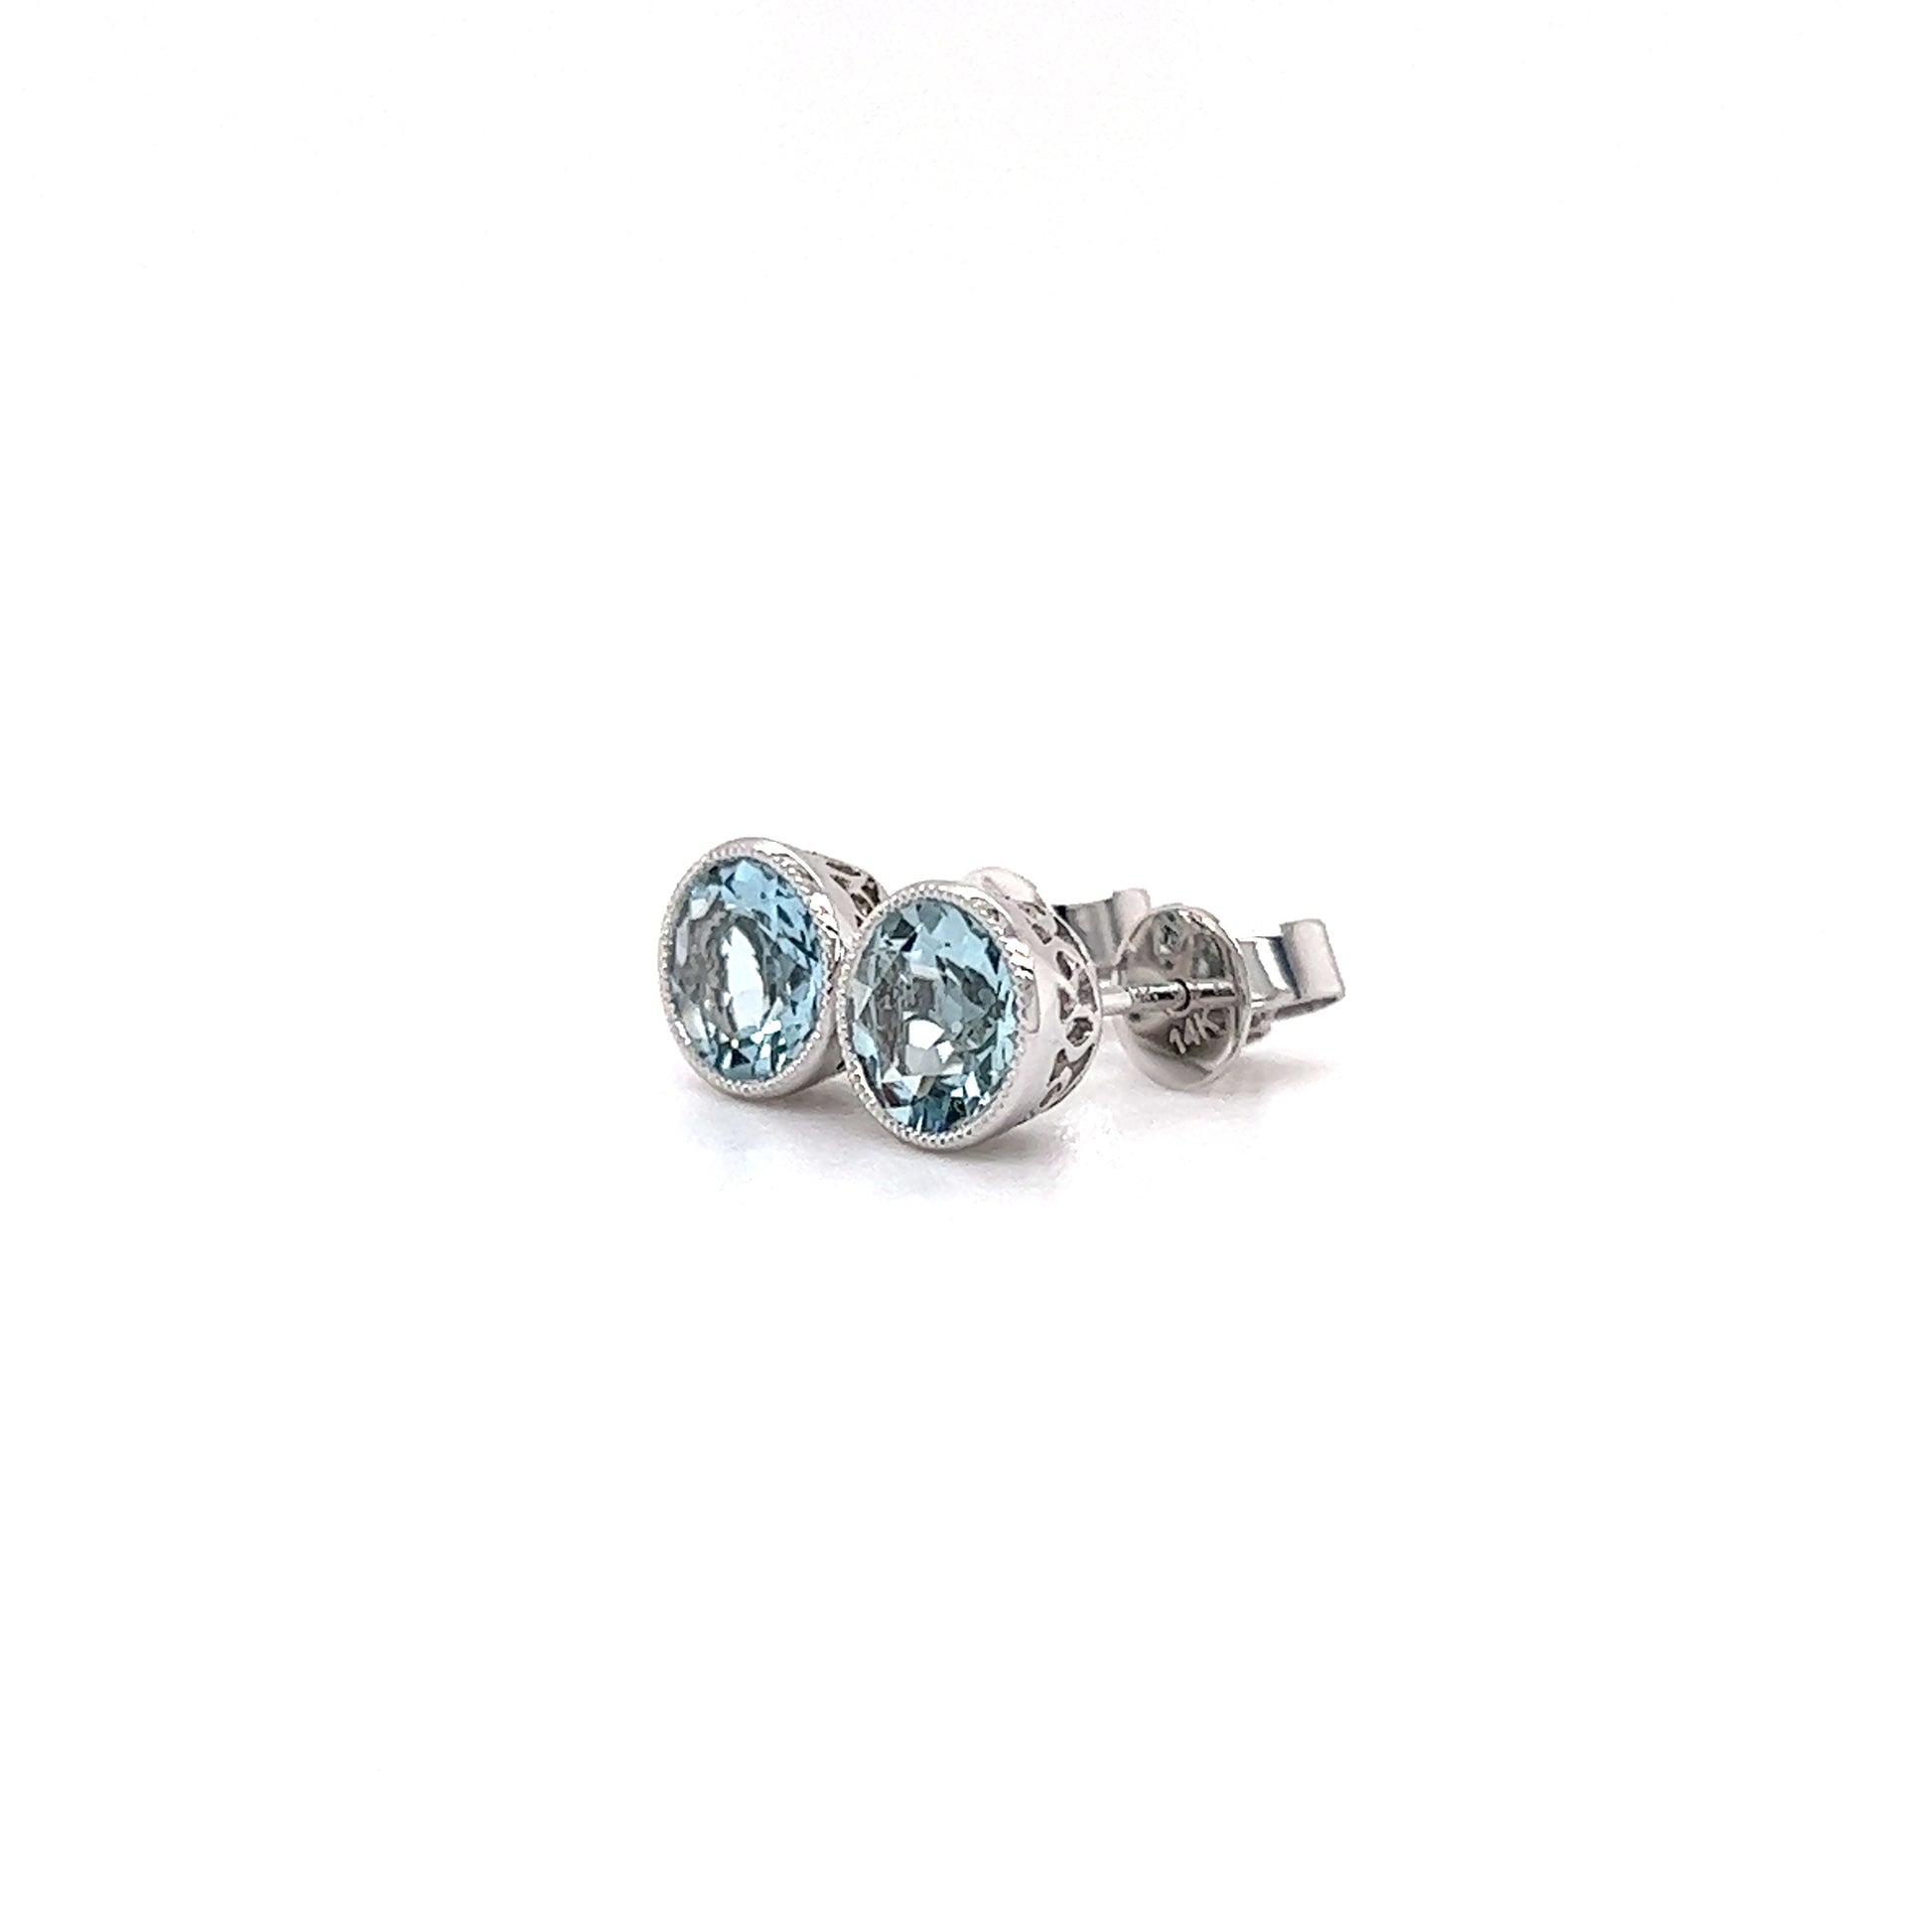 Aquamarine Stud Earrings with Filigree and Milgrain Details in 14K White Gold Right Side View